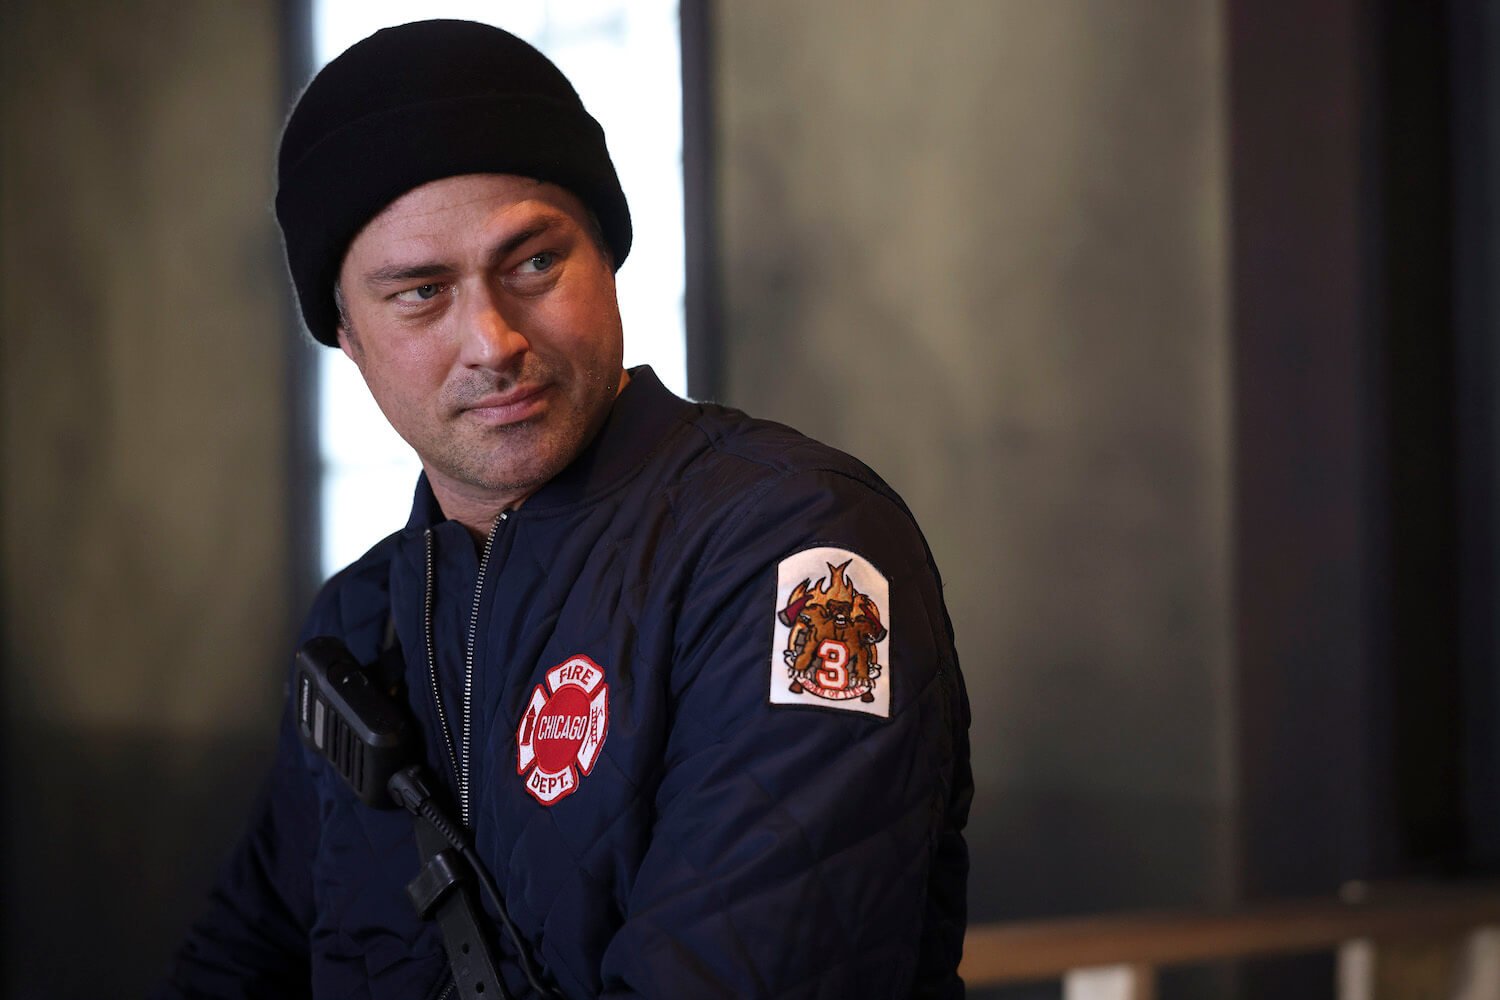 'Chicago Fire' star Taylor Kinney as Kelly Severide